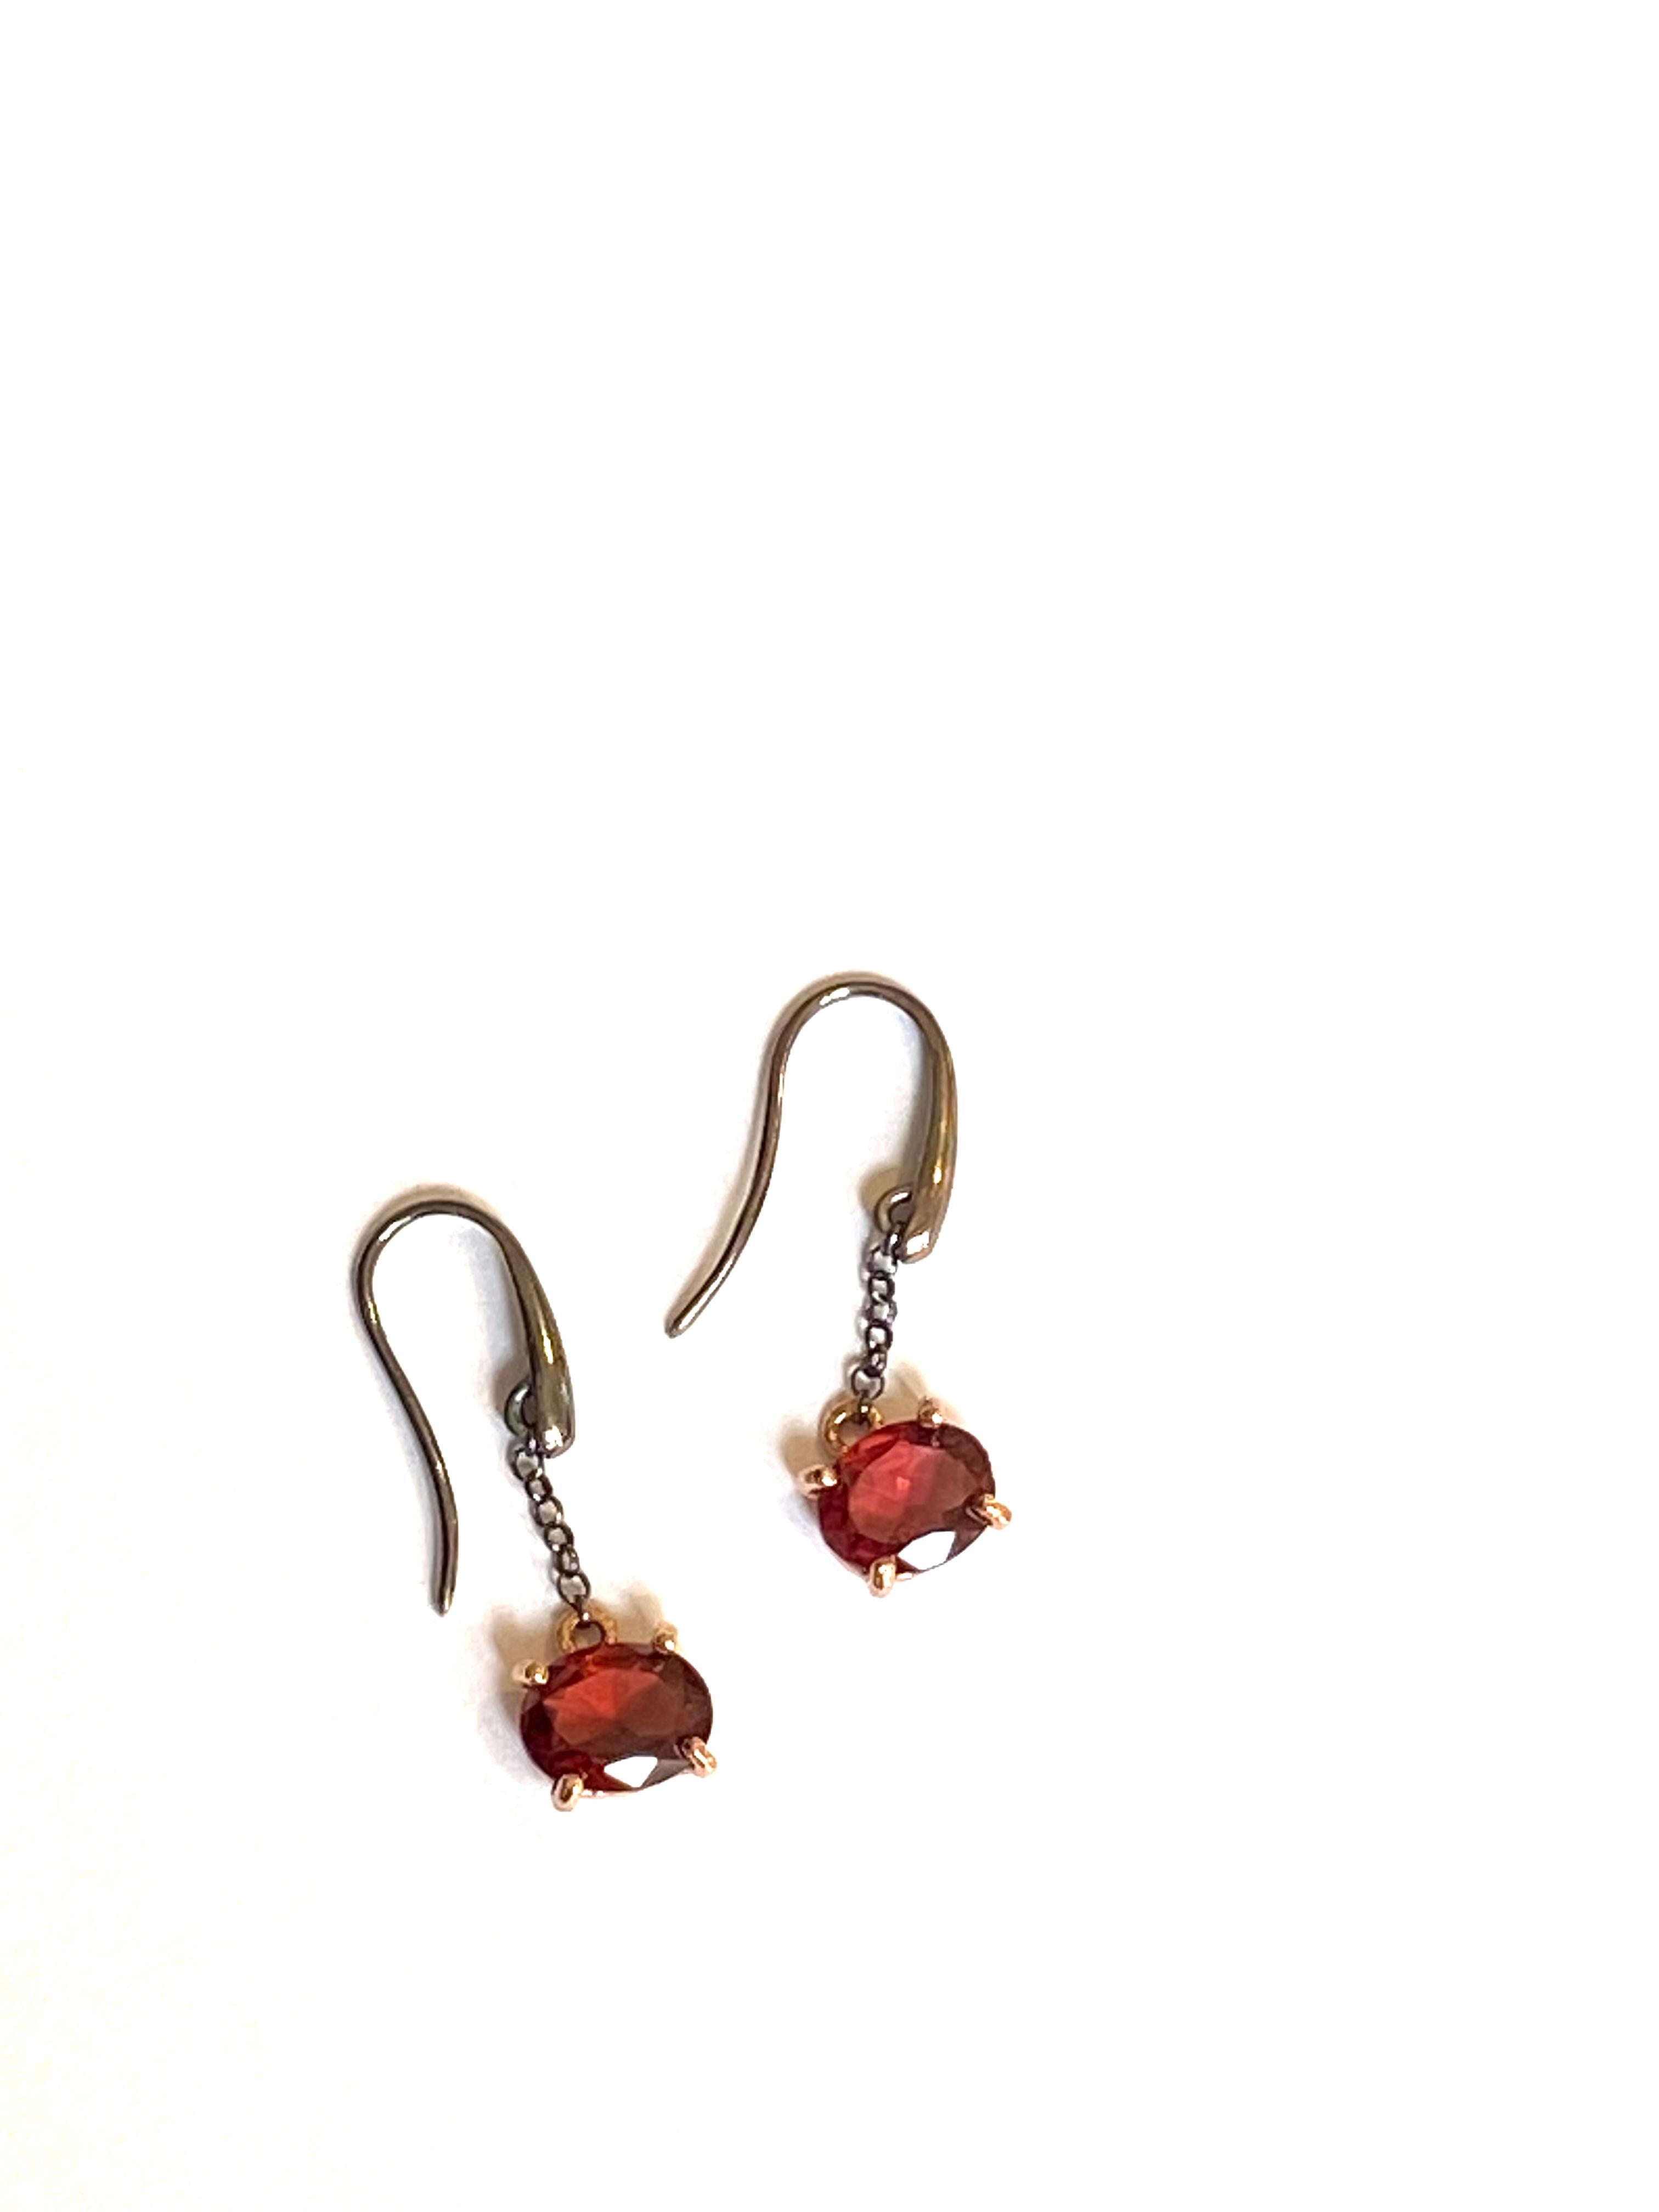  Burnished Sterling Silver Rose GoldGarnet Lever-back Dangle Earrings
This beautiful pair of lever-back earrings is handcrafted in burnished sterling silver and 9 karats rose gold by expert artisans and enriched with a deep red garnet stone. 
Garnet